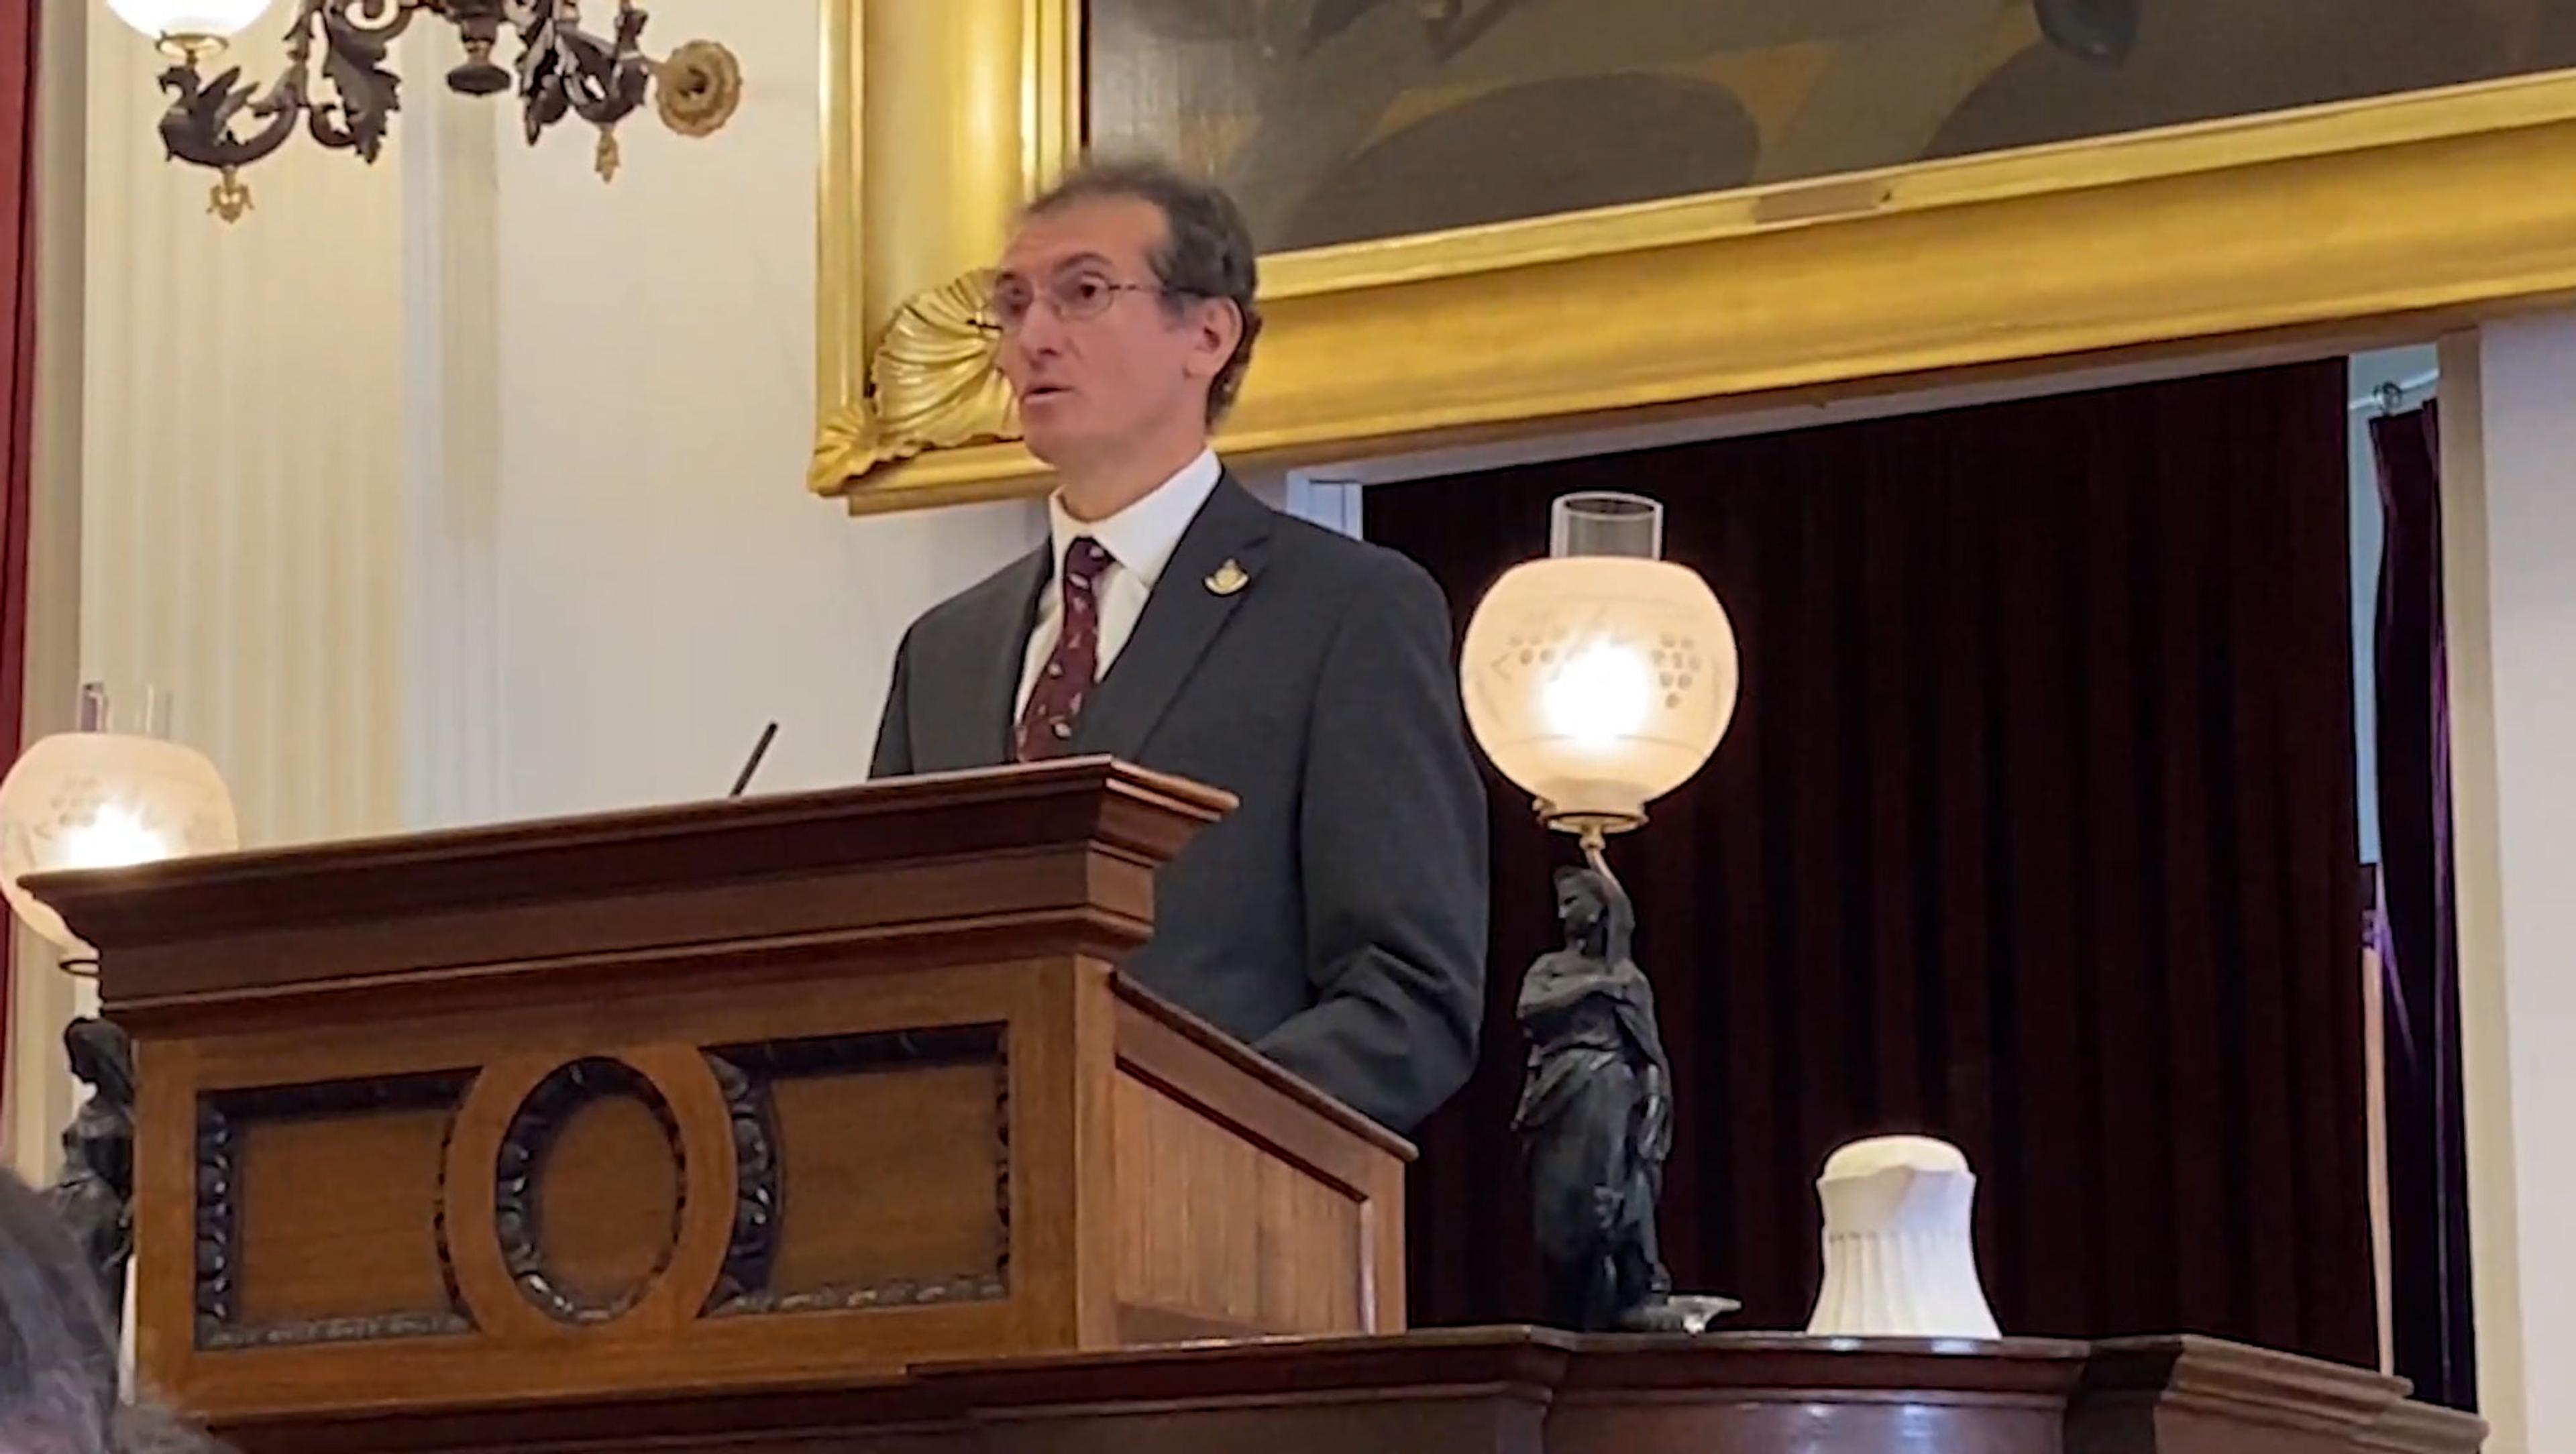 Address to Vermont's House of Representatives